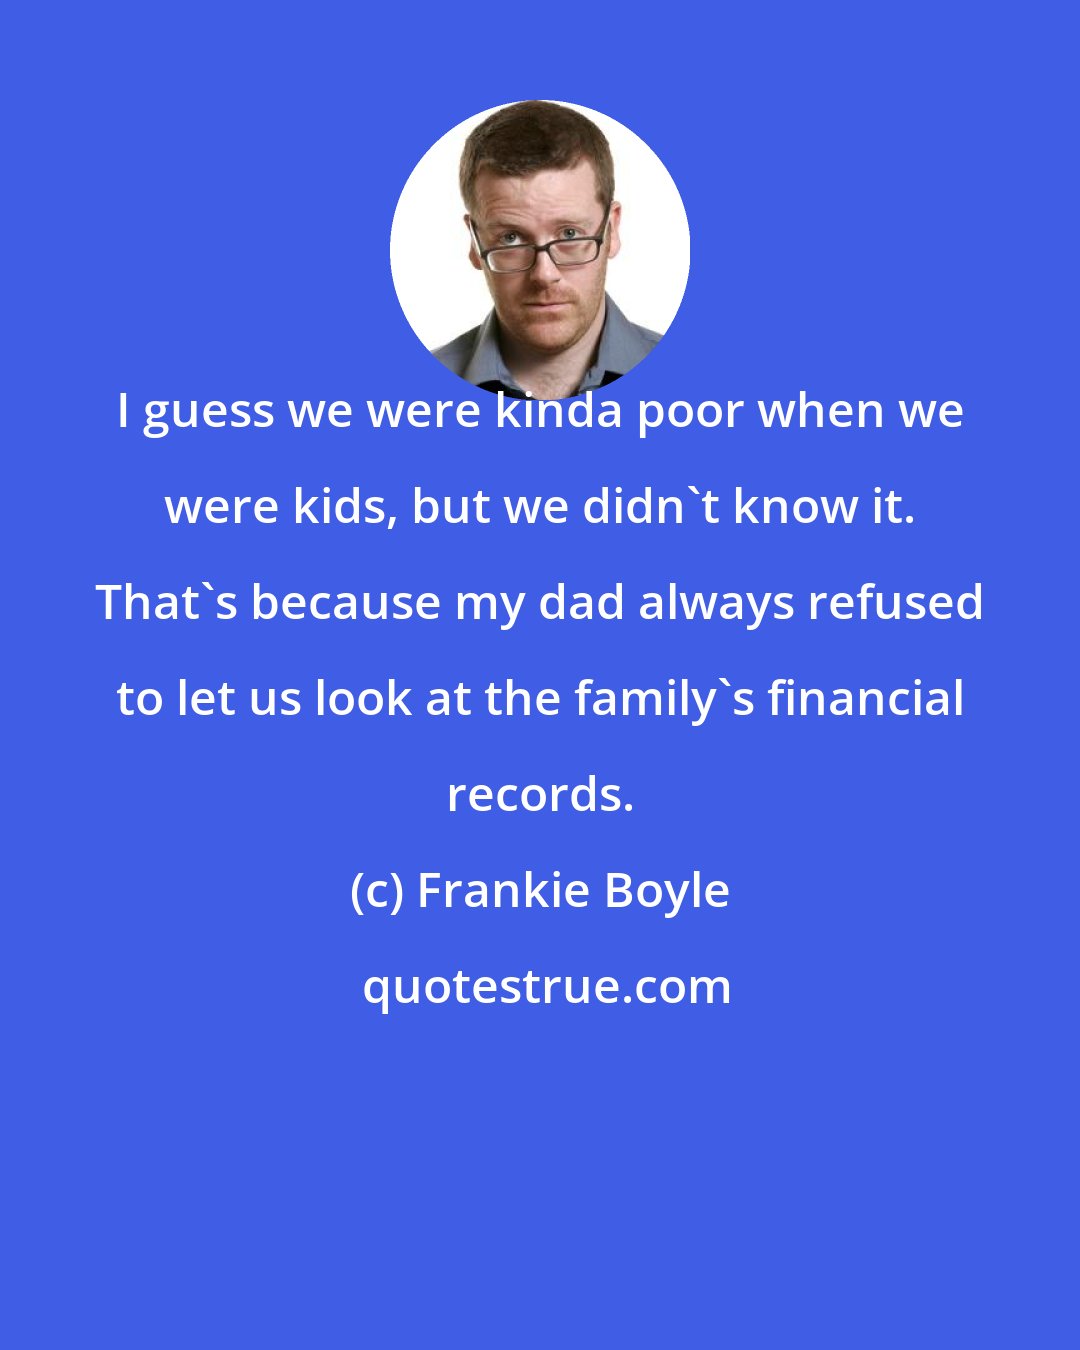 Frankie Boyle: I guess we were kinda poor when we were kids, but we didn't know it. That's because my dad always refused to let us look at the family's financial records.